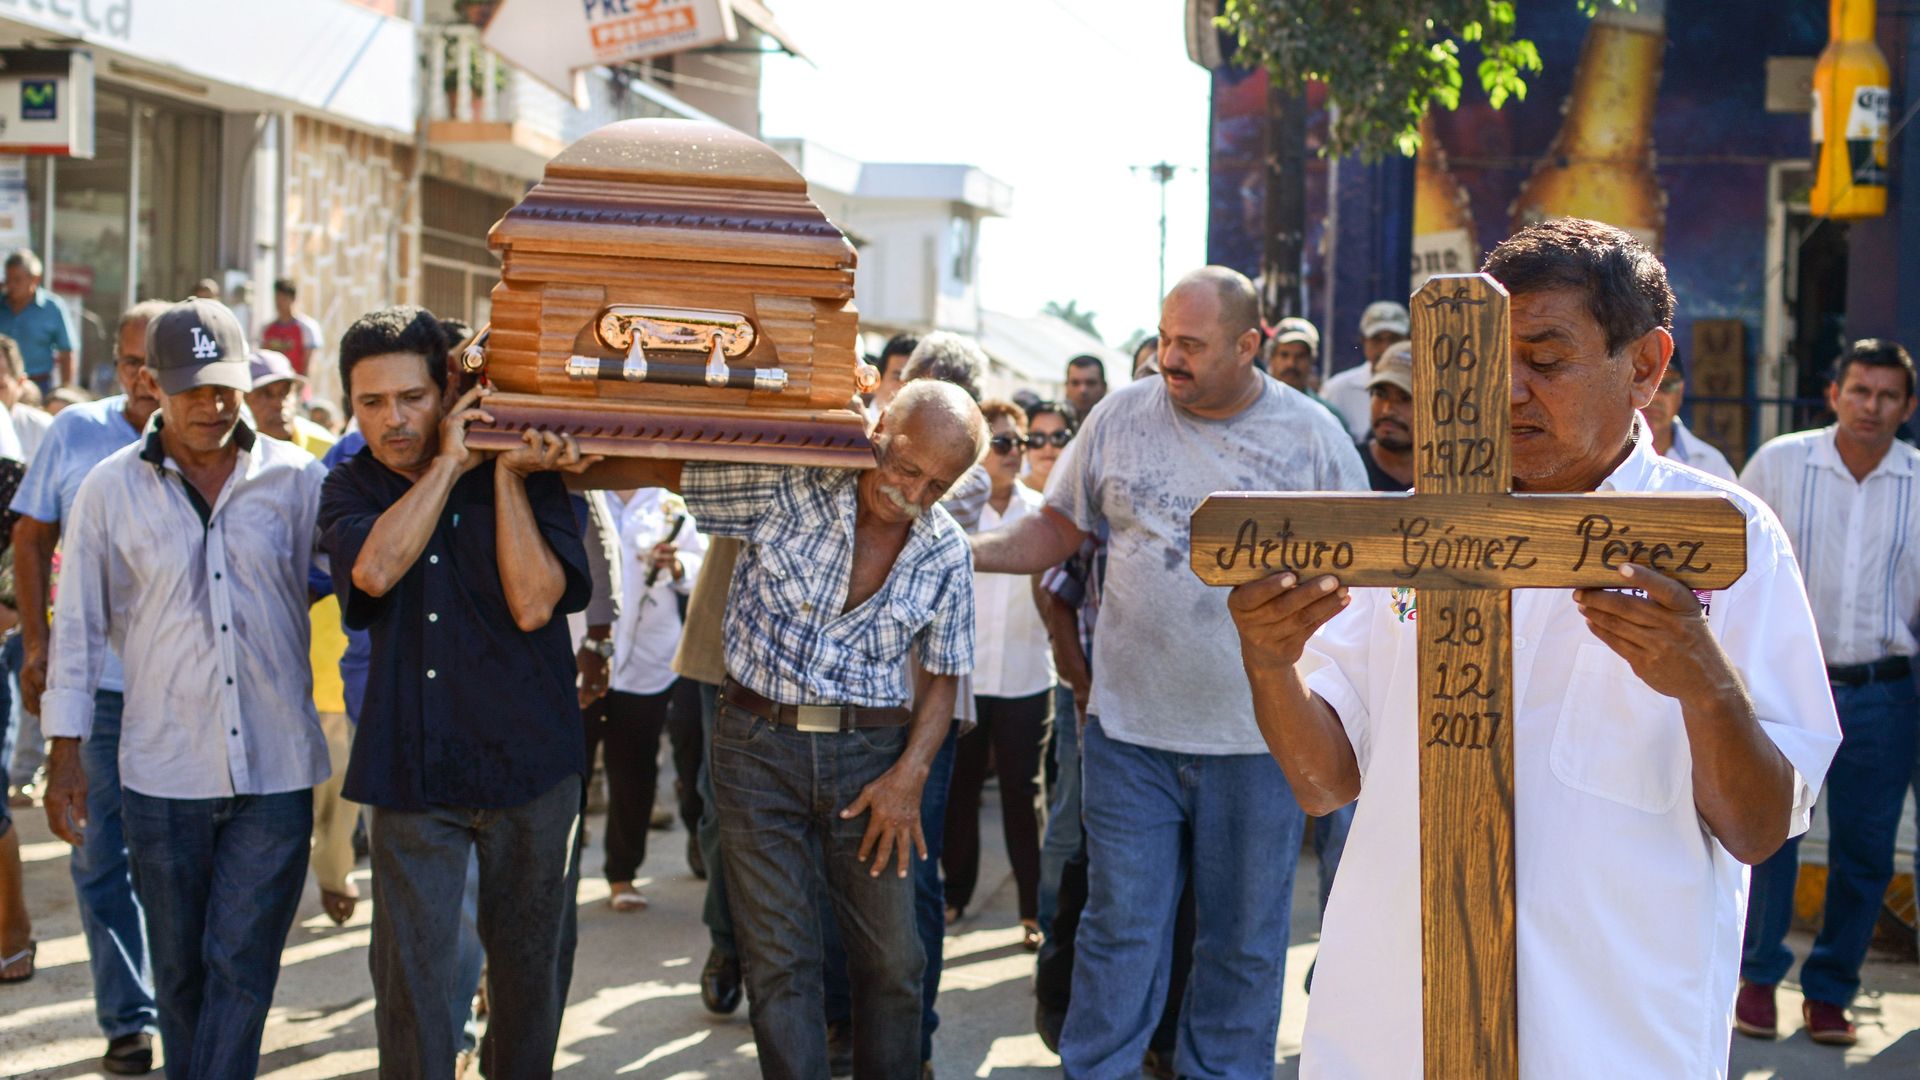 People carry a wooden coffin and wooden cross in Mexico down the street.